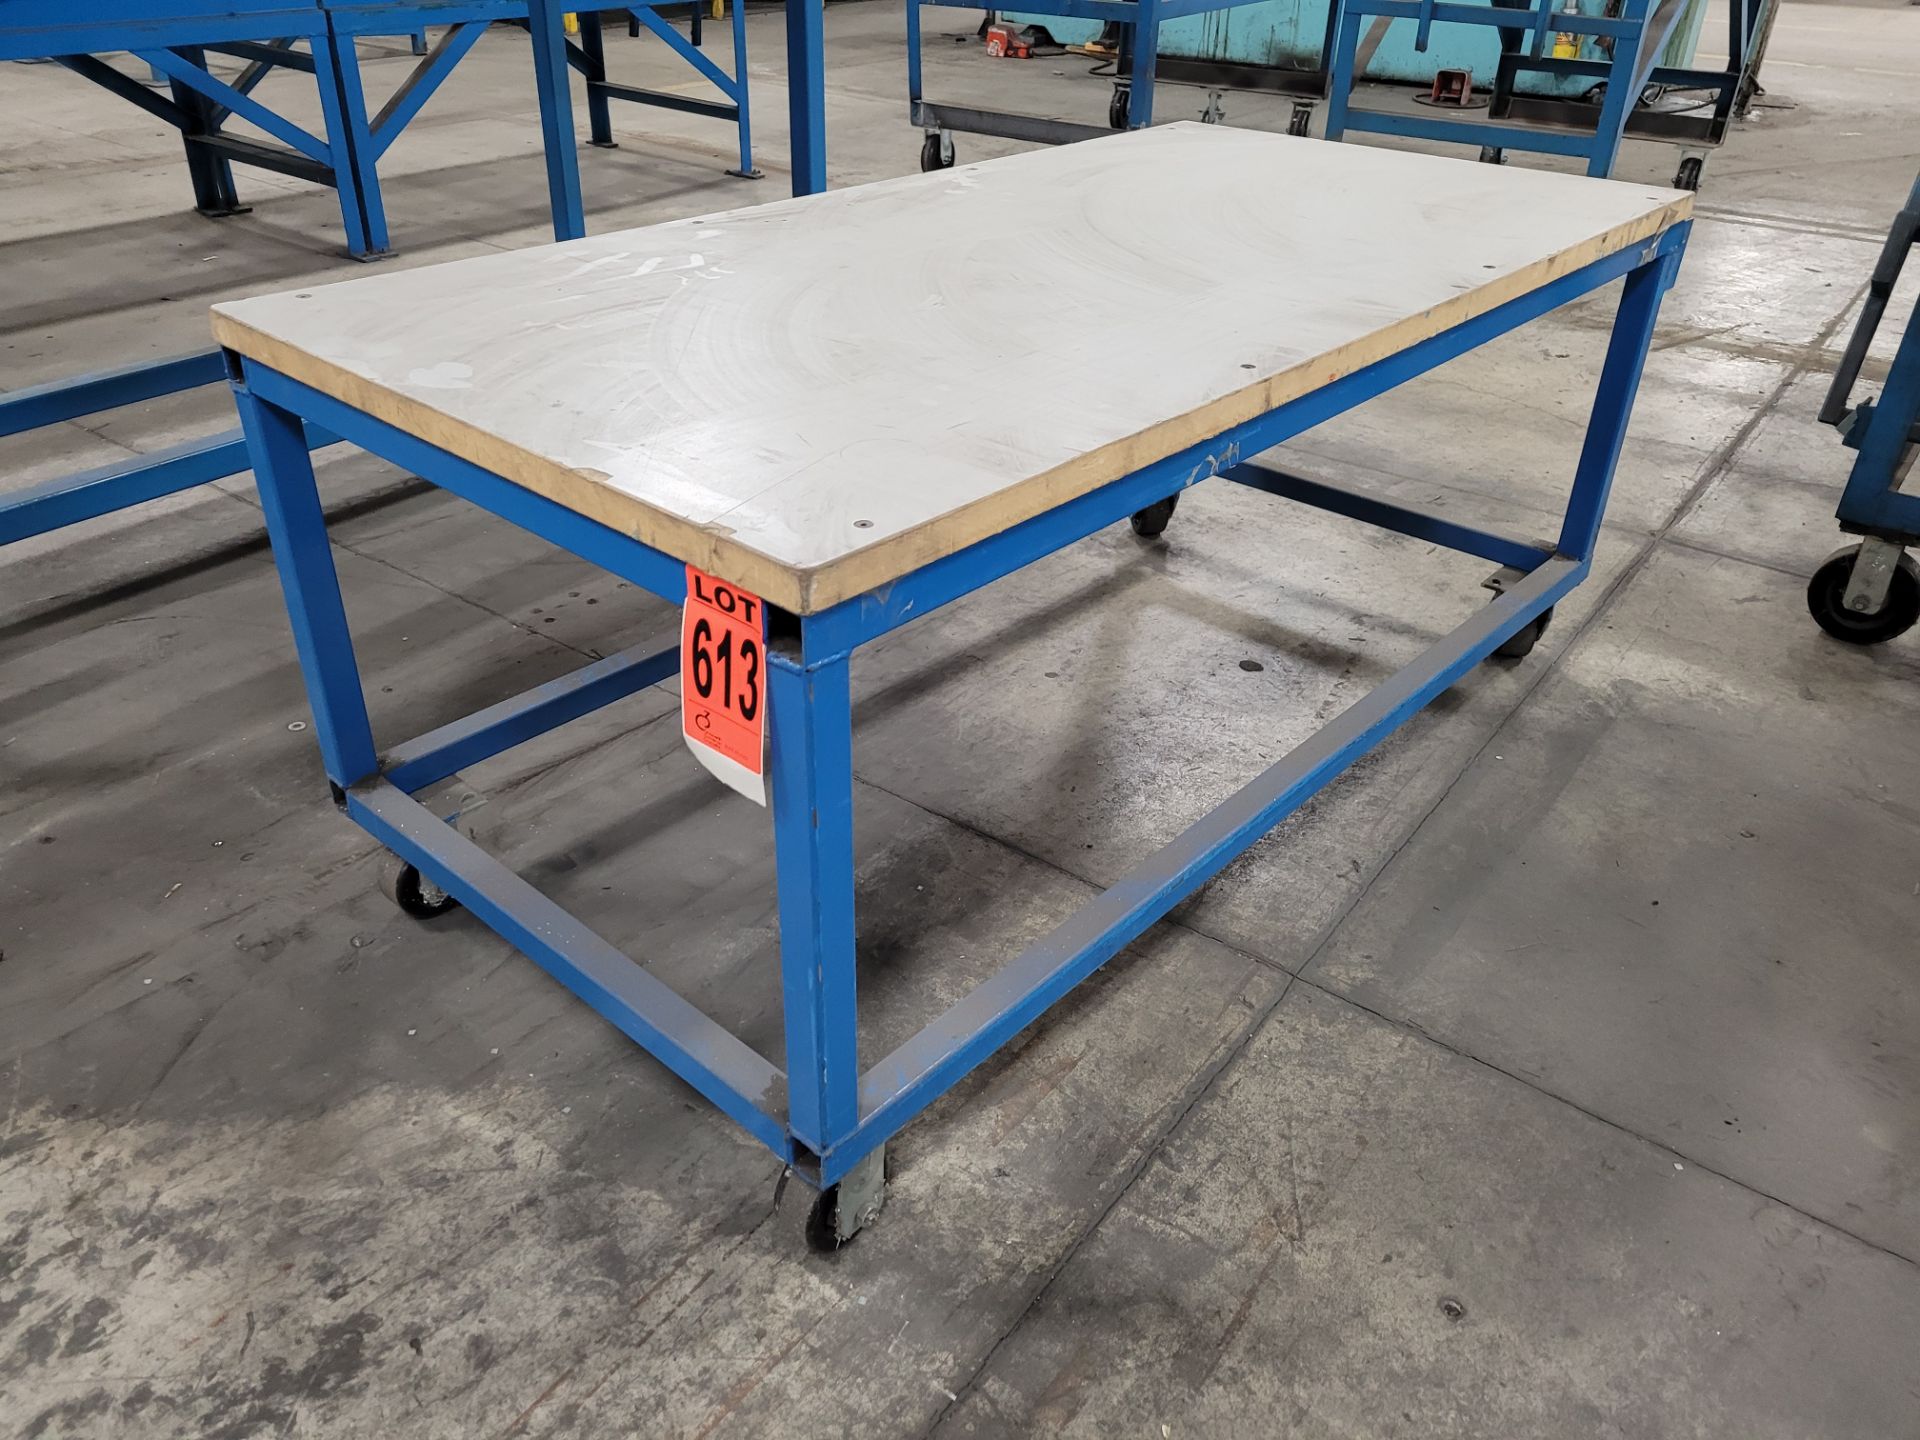 Mobile steel frame worktable on casters w/plywood surface